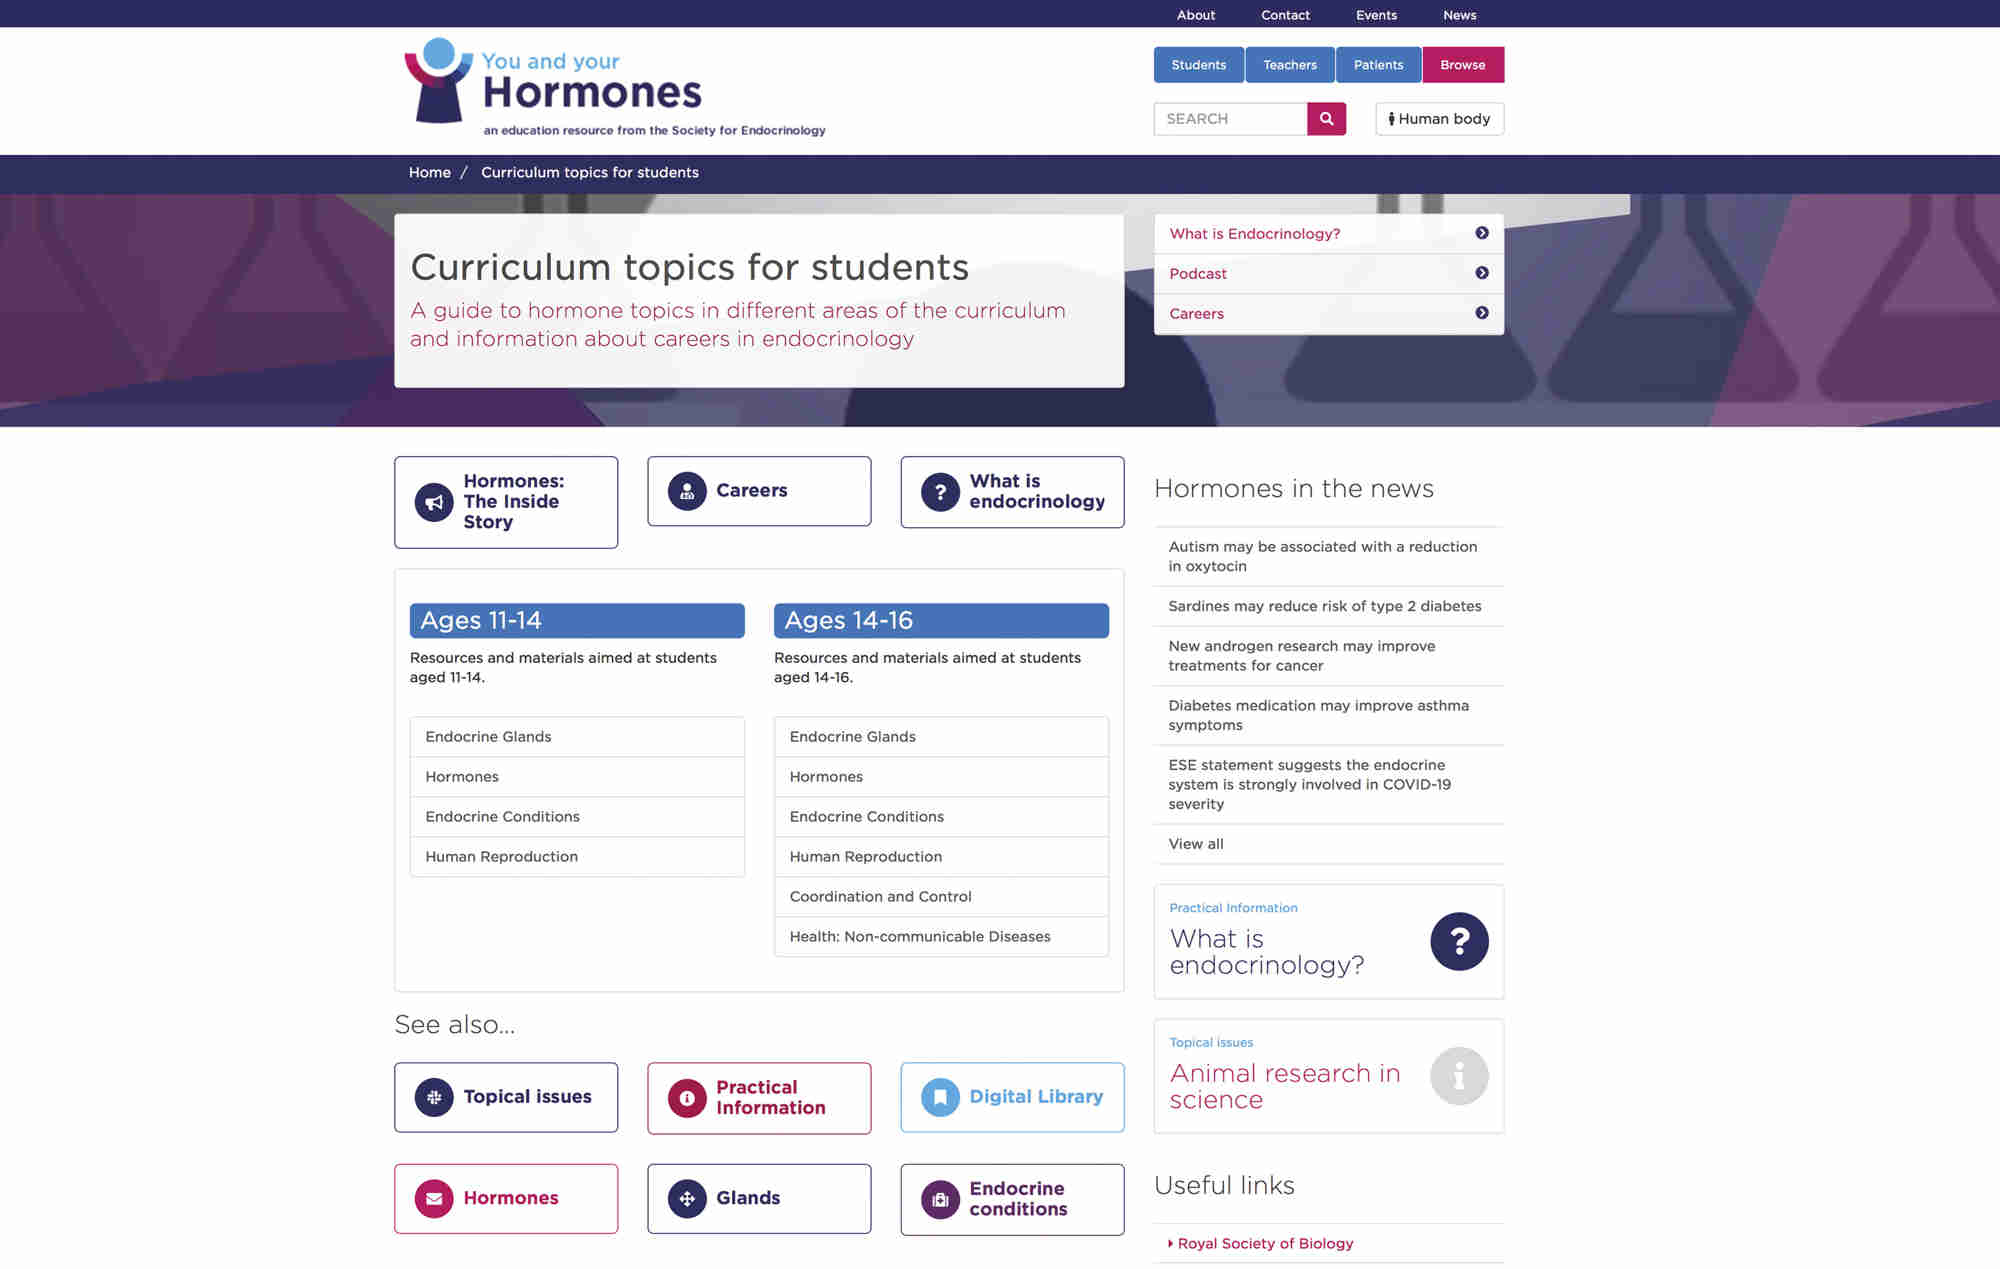 Curriculum topics: all relevant curriculum resources are now categorised by topic and age.